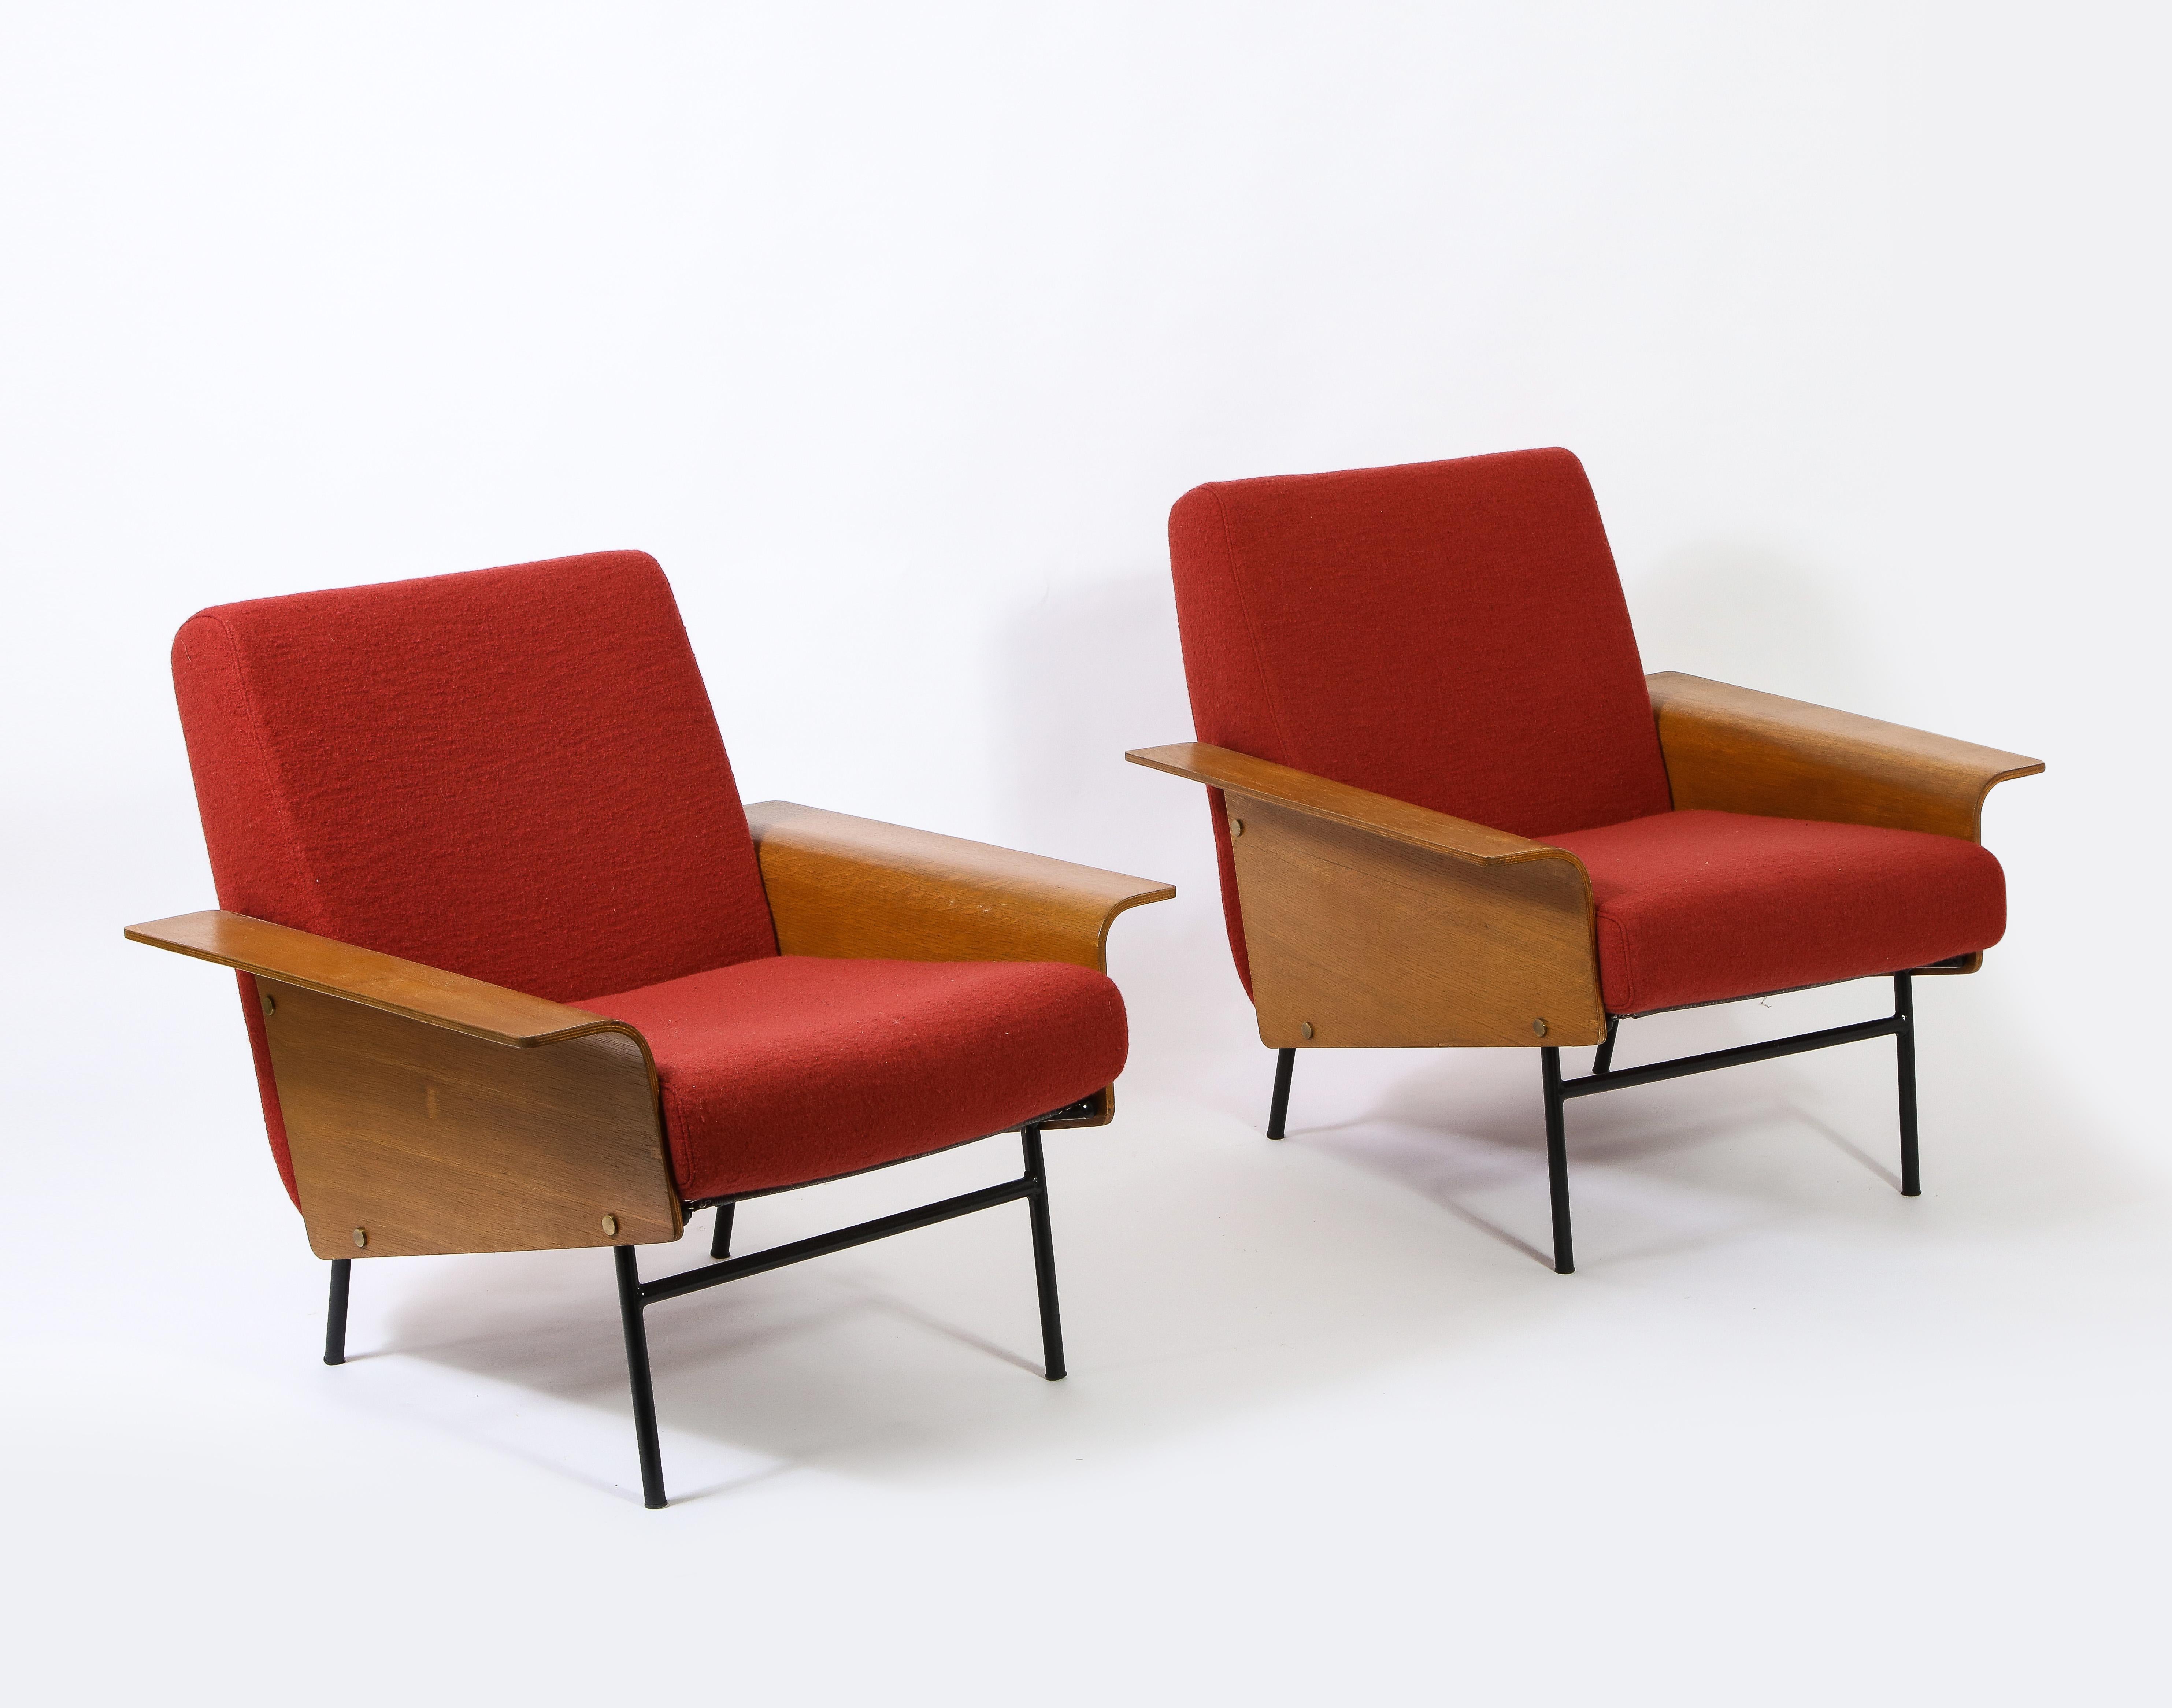 A rare pair of G10 armchairs by Pierre Guariche for Airborne. Newly upholstered in wool, bent plywood arms on an enameled tubular steel frame. Guariche is the quintessential French designer. His forms are defined by simple lines and strong elegance.